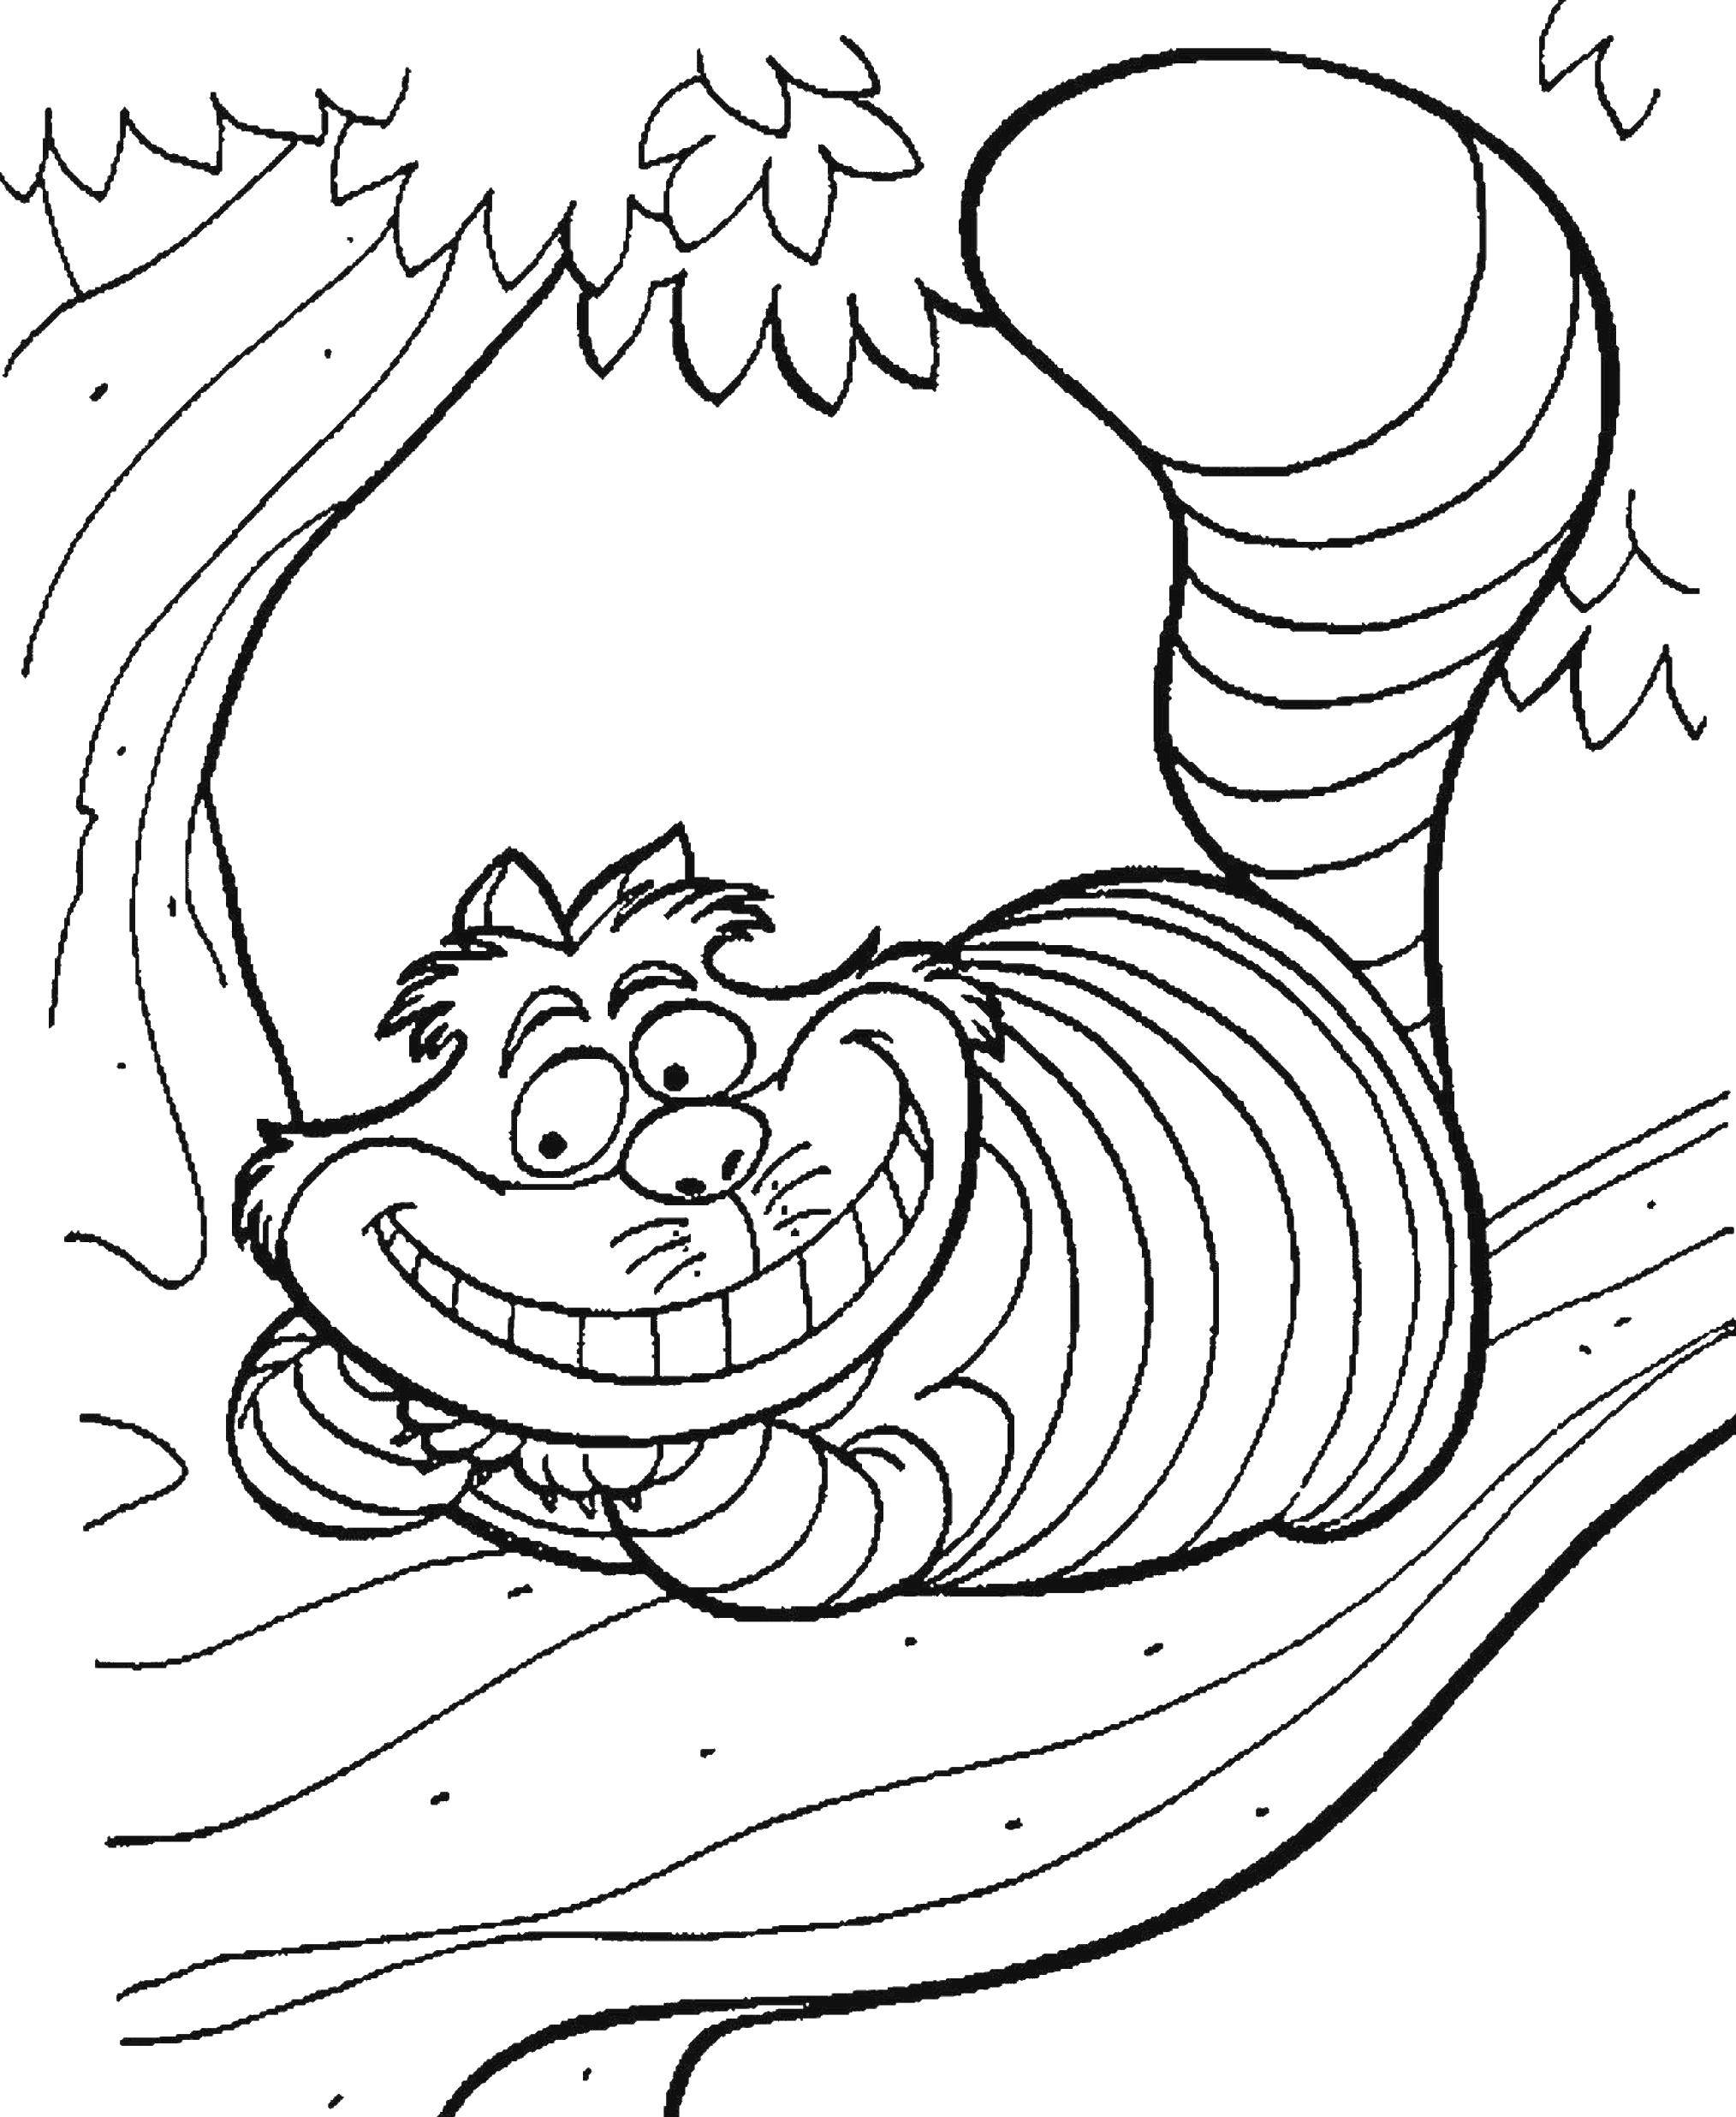 Coloring Cheshire cat in a tree. Category Fairy tales. Tags:  tales, the Cheshire cat.